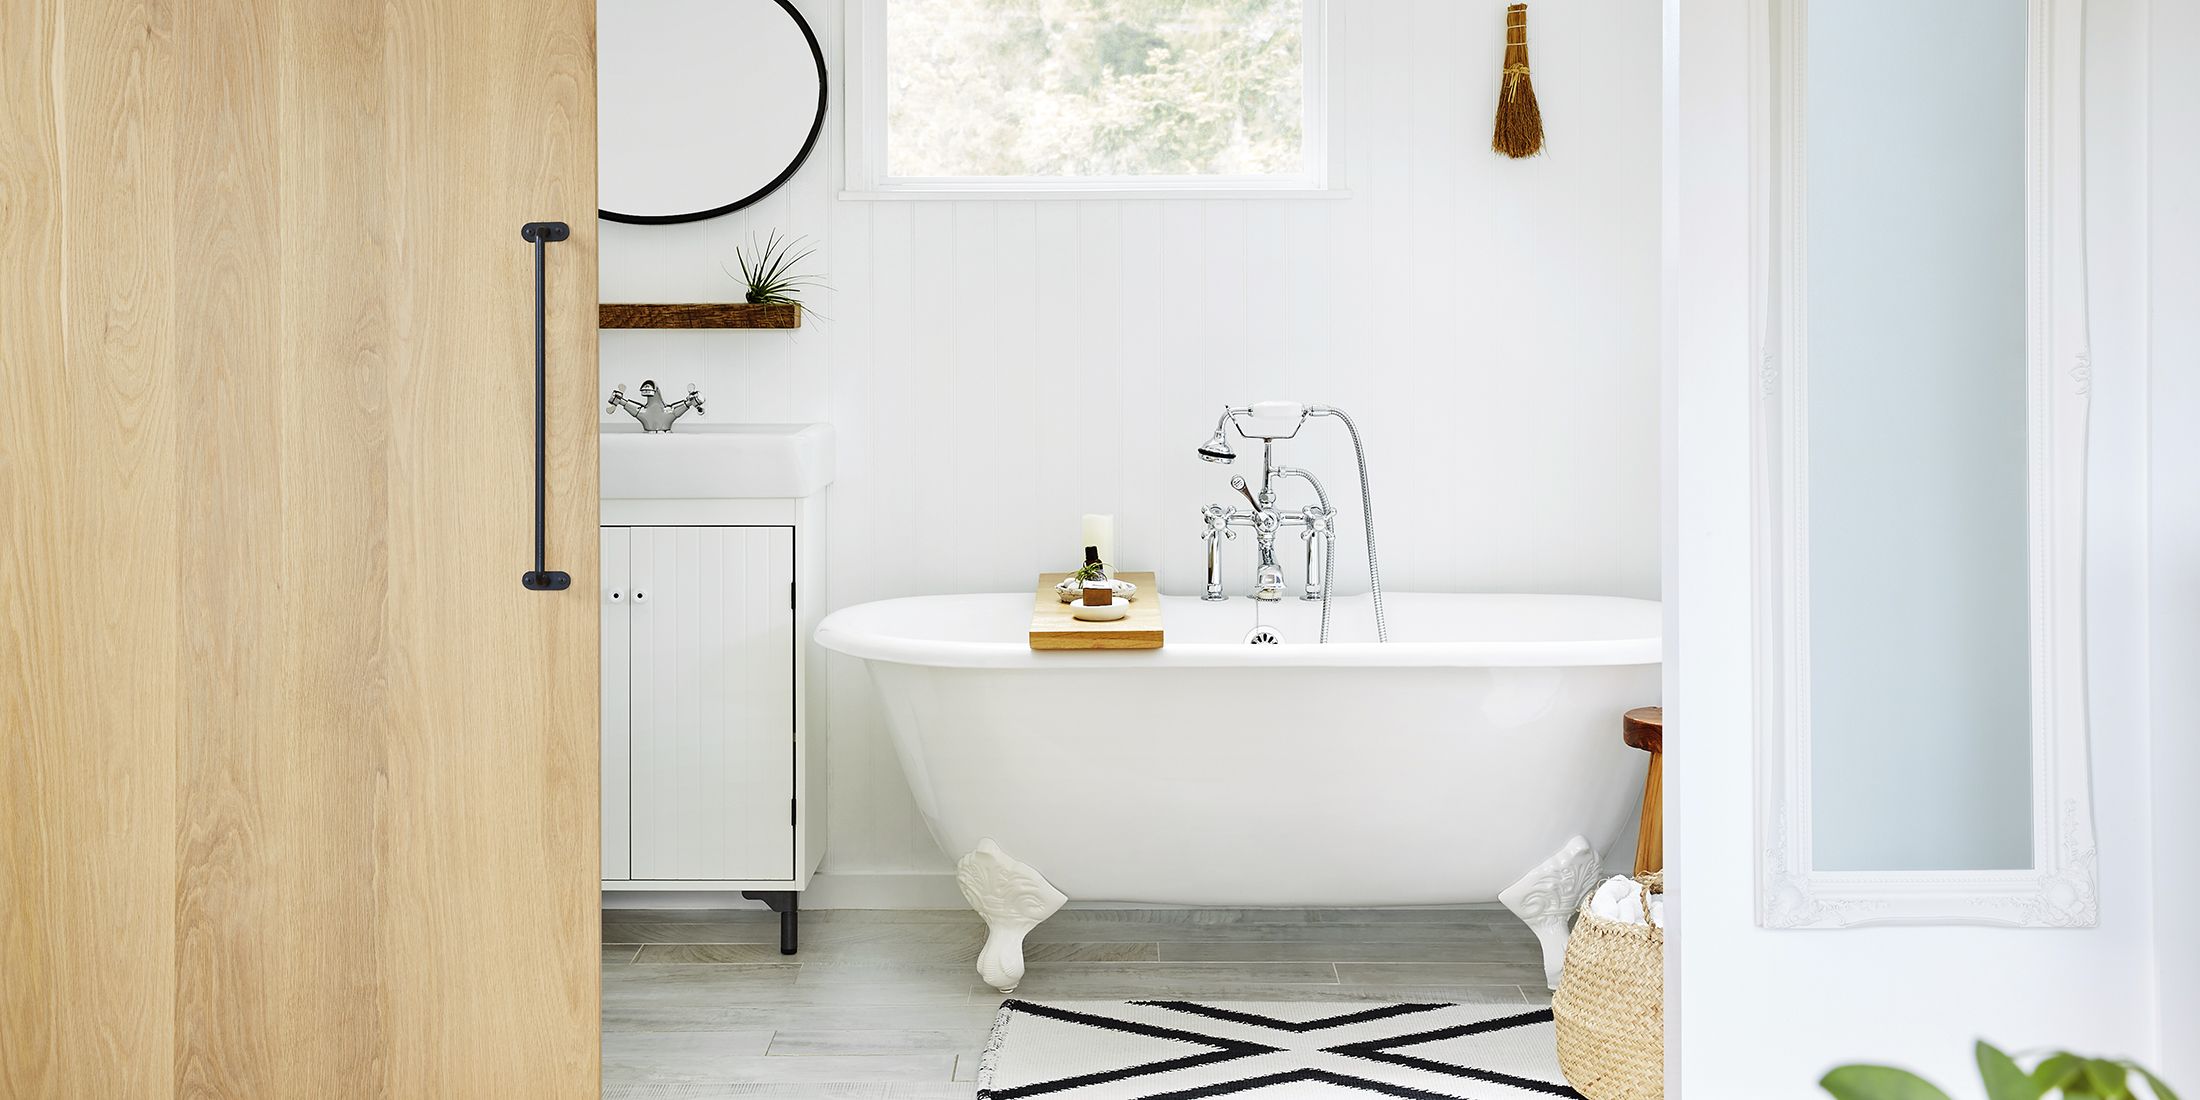 How To Clean Bathroom Countertops And Keep Them Sparkling